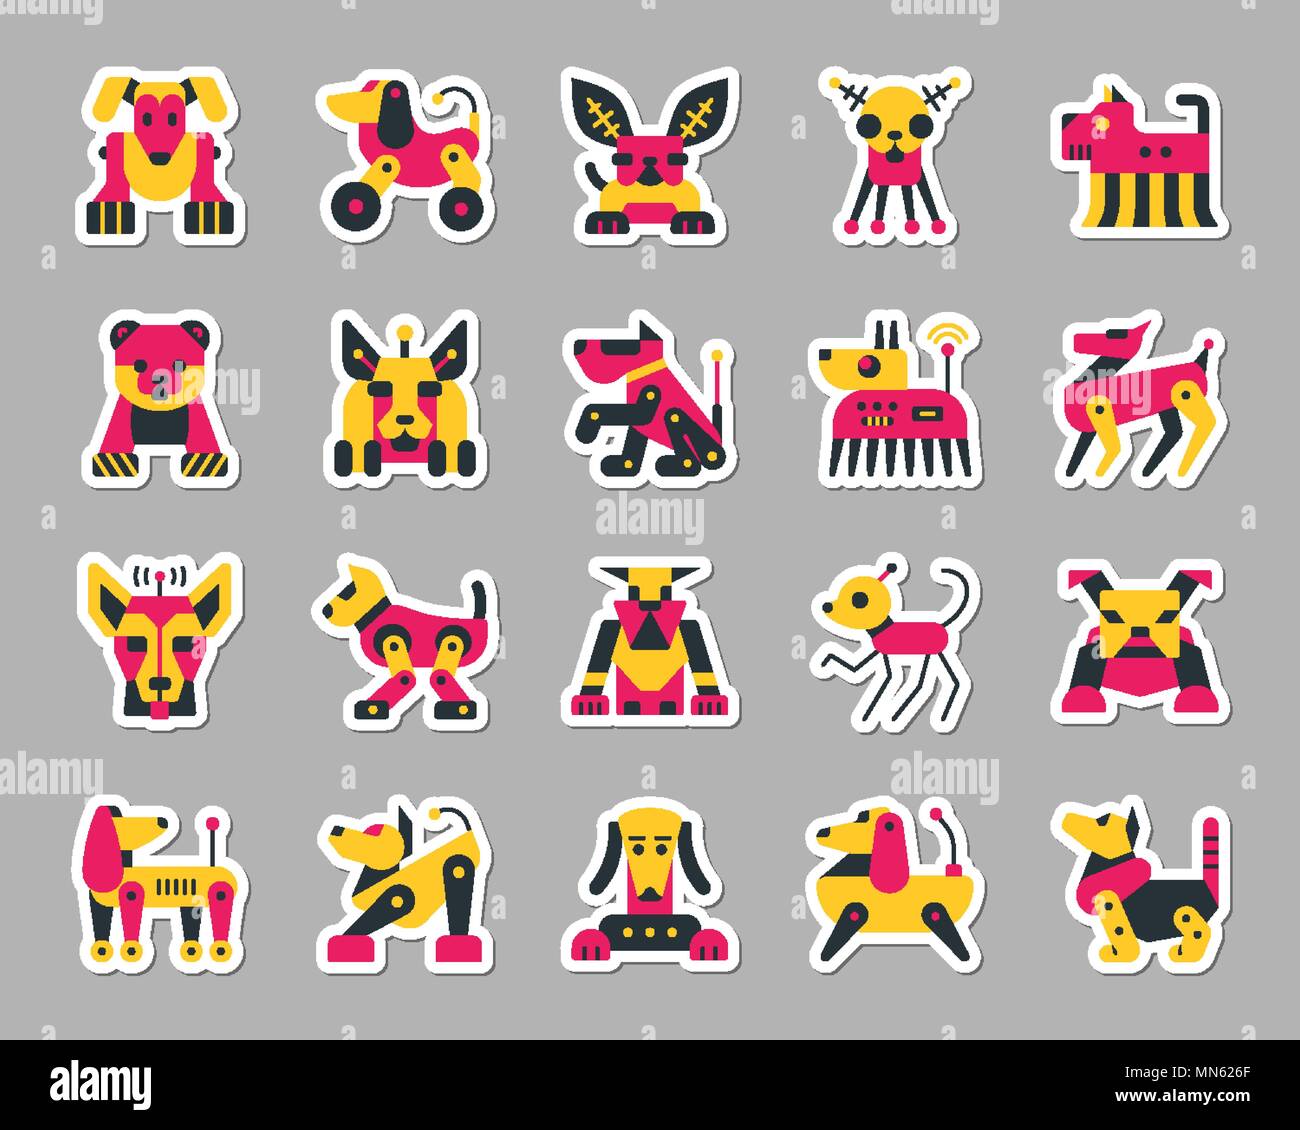 Robot Dog sticker icons set. Web flat sign kit of pet. Robot Dog icon collection includes transformer, machine, cyborg. Simple colorful symbol for pat Stock Vector